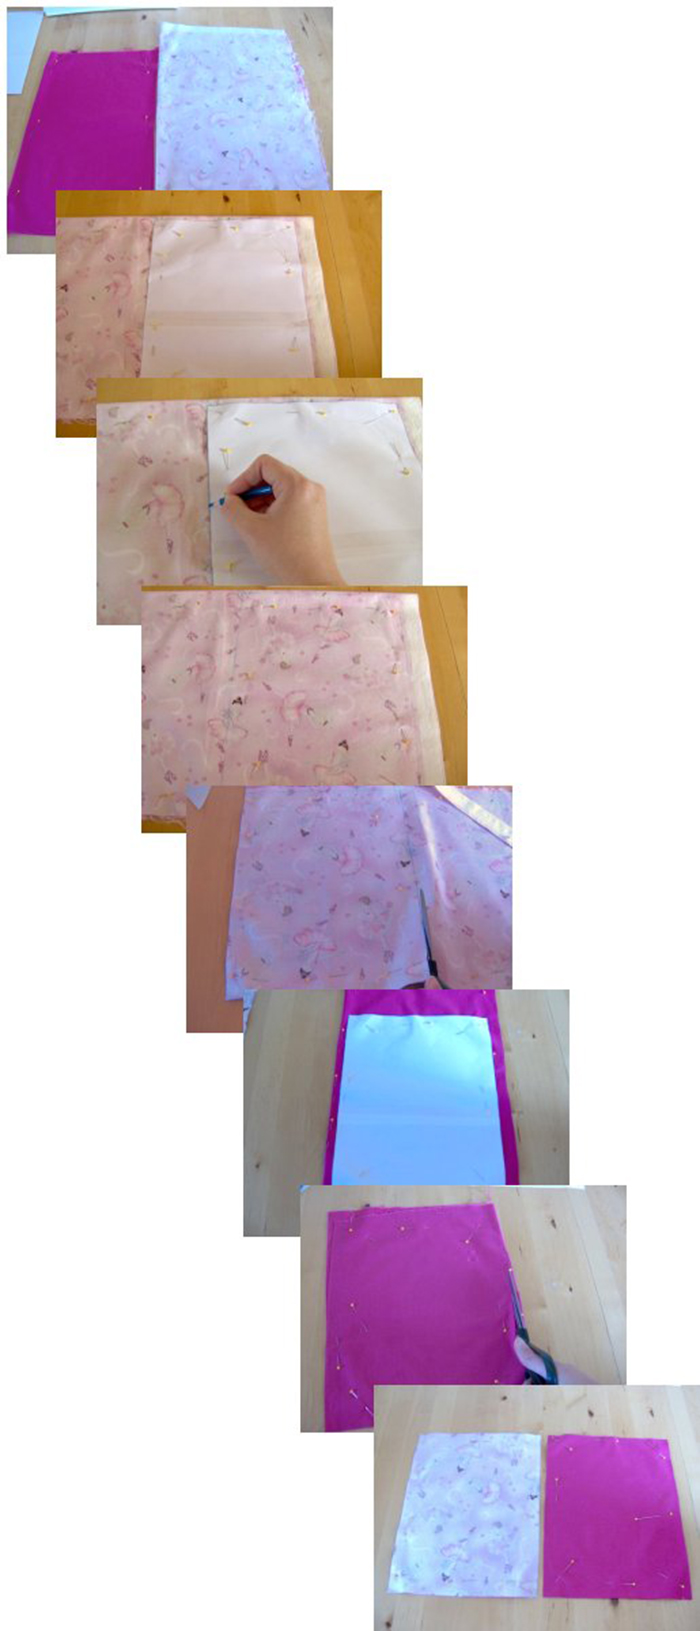 Things to make and do - sew a drawstring bag